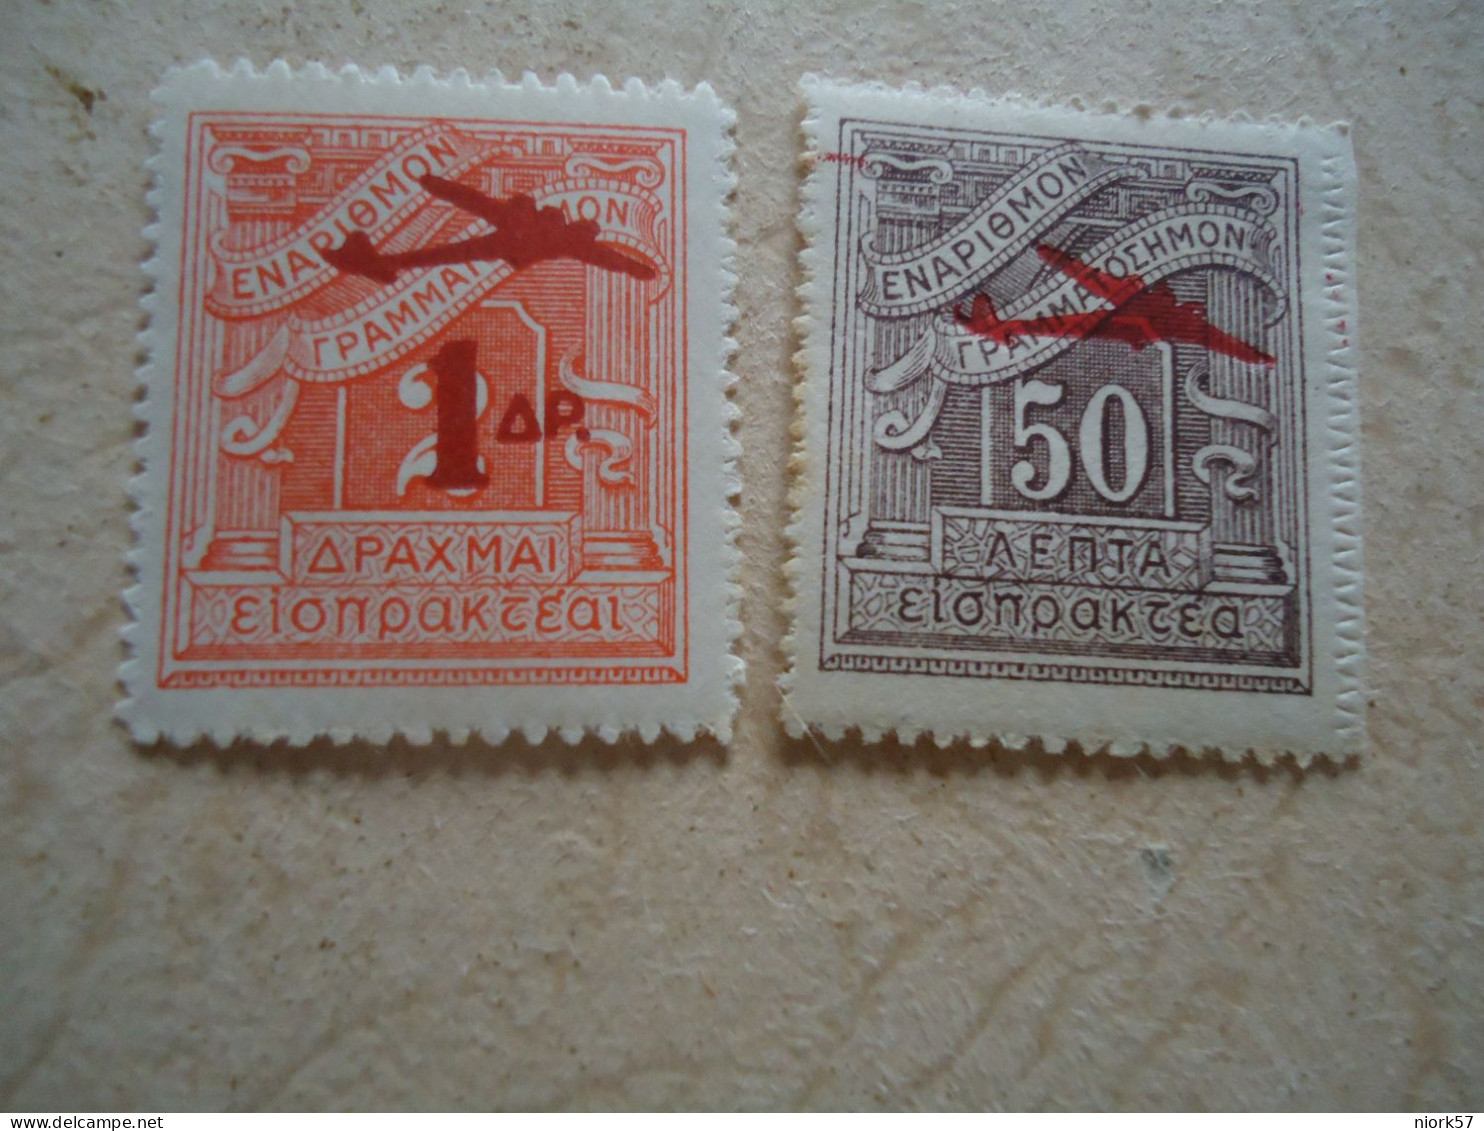 GREECE     ΜΝΗ   2  STAMPS POSTAGE DUE  OVERPRINT  AIRPLANES - Used Stamps